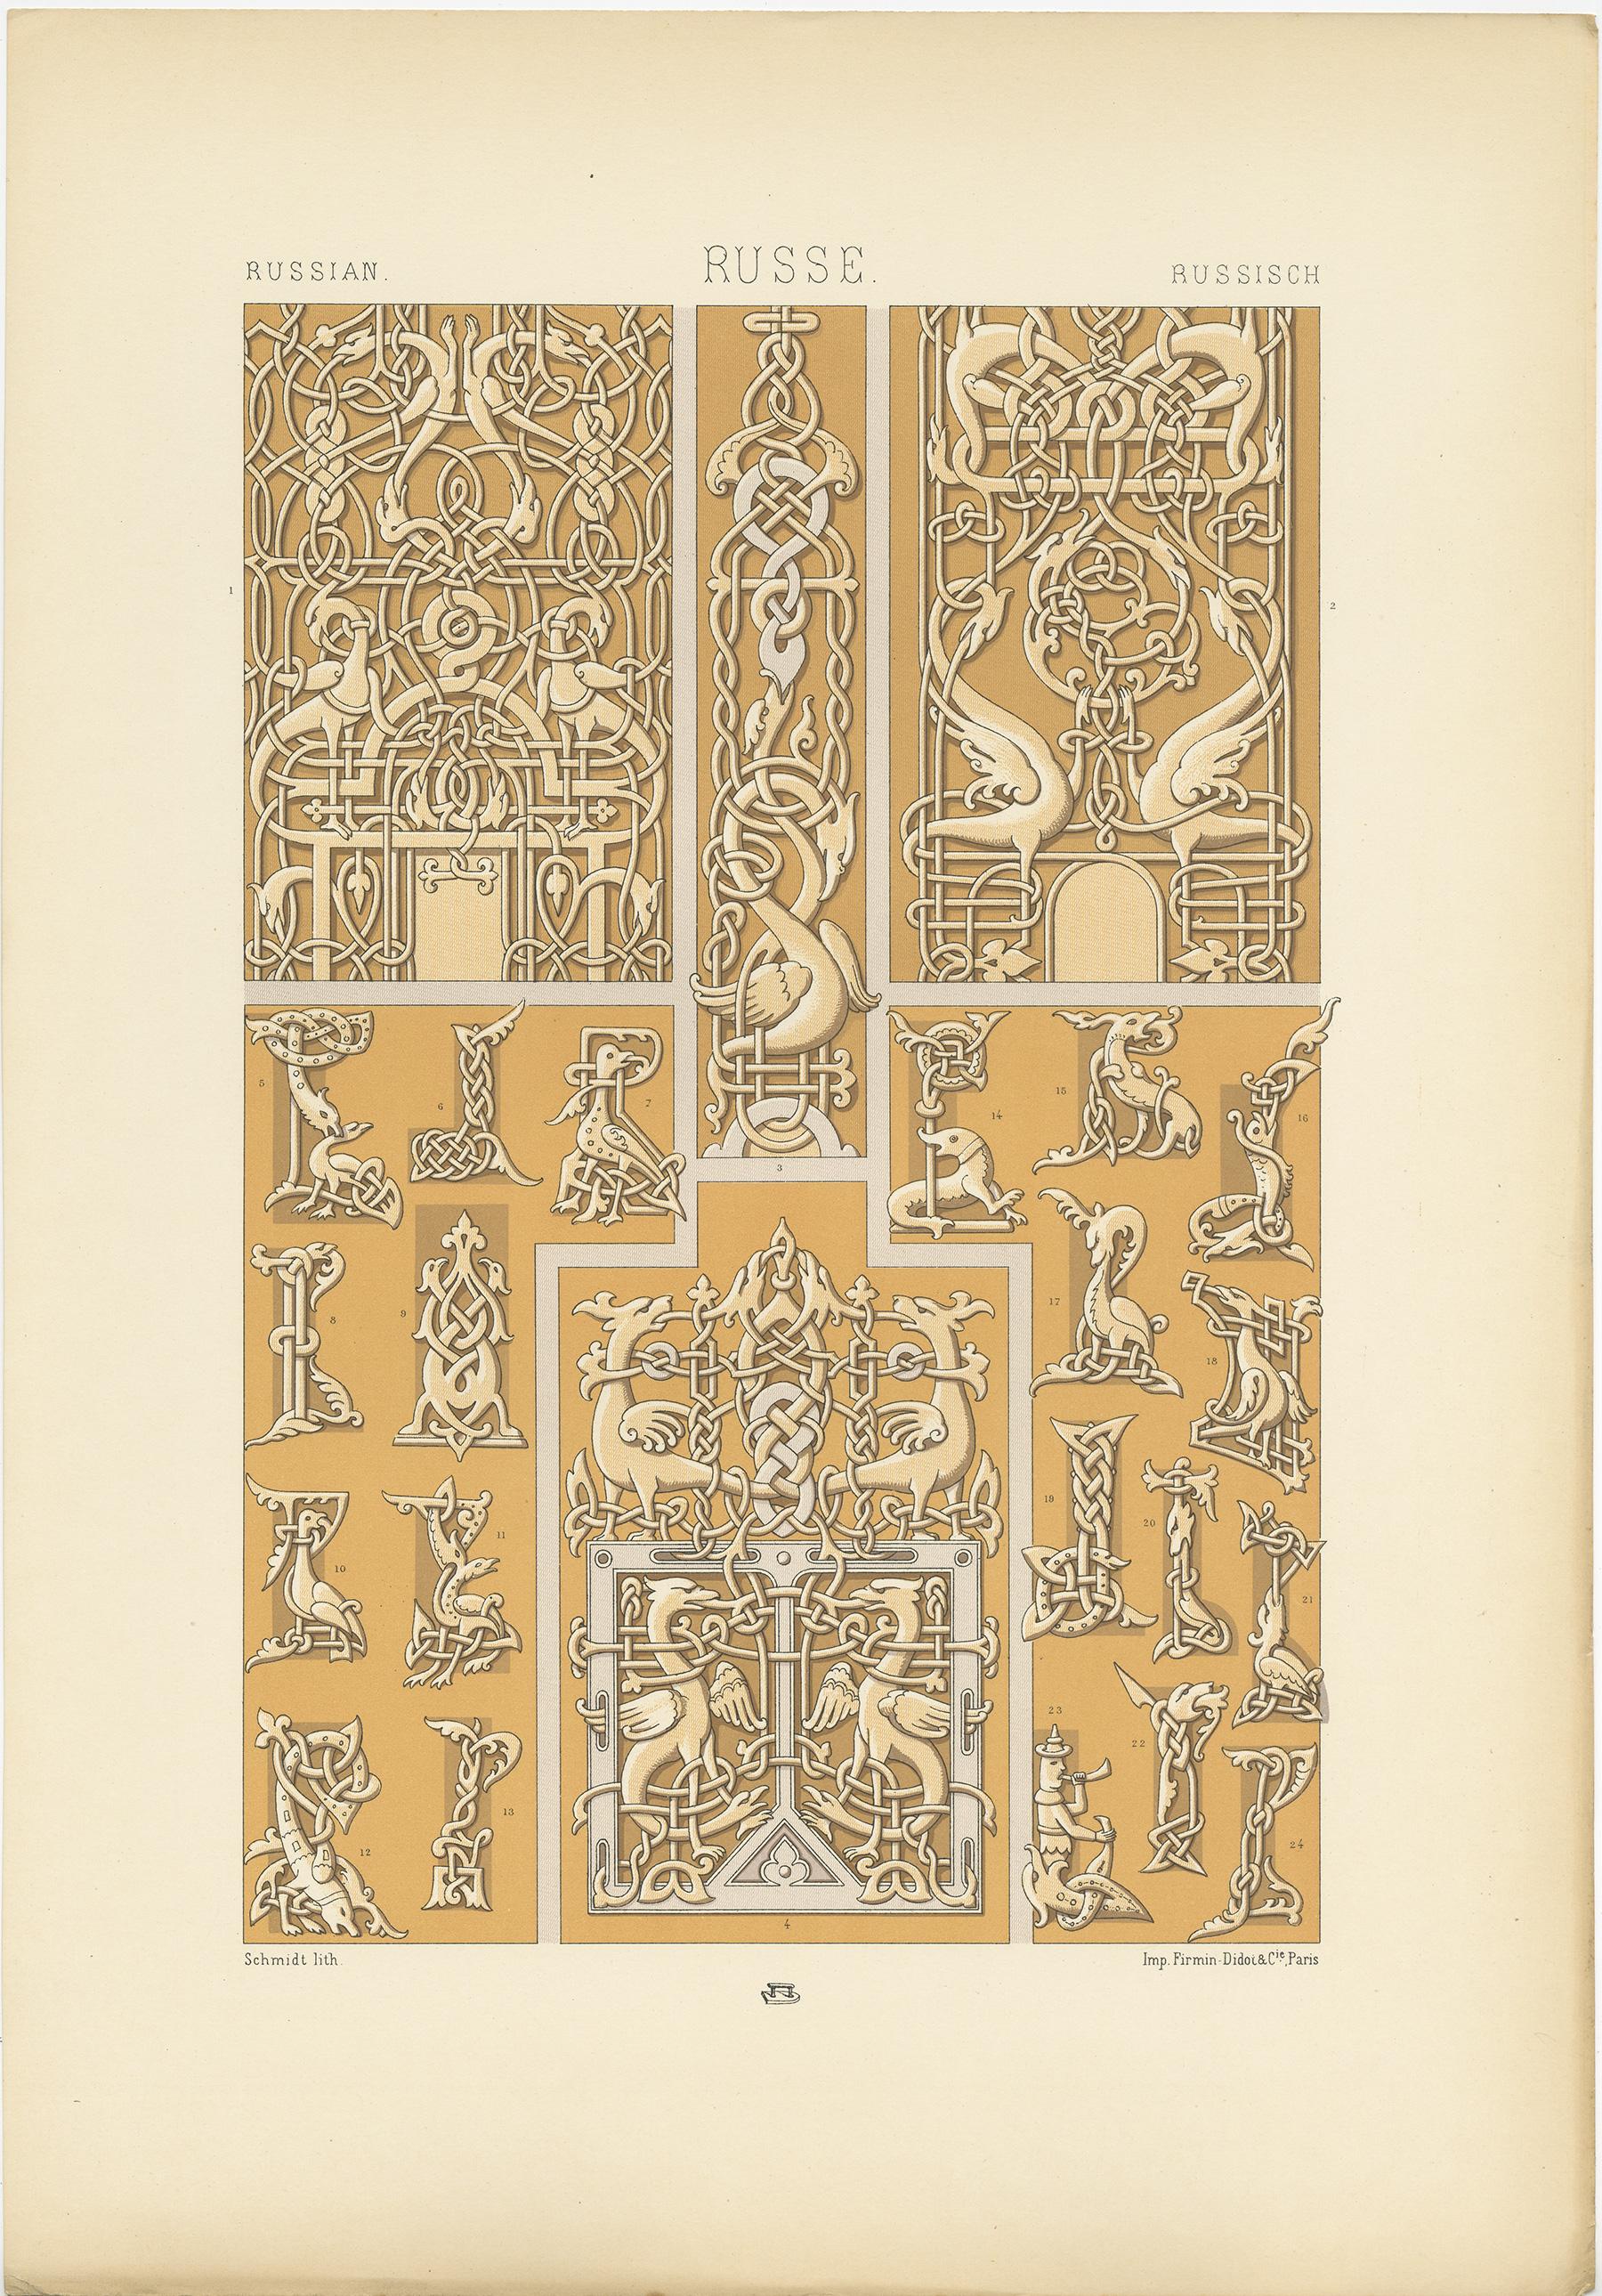 Antique print titled 'Russian - Russe - Russische'. Chromolithograph of ornaments from 14th century manuscripts ornaments. This print originates from 'l'Ornement Polychrome' by Auguste Racinet. Published circa 1890.